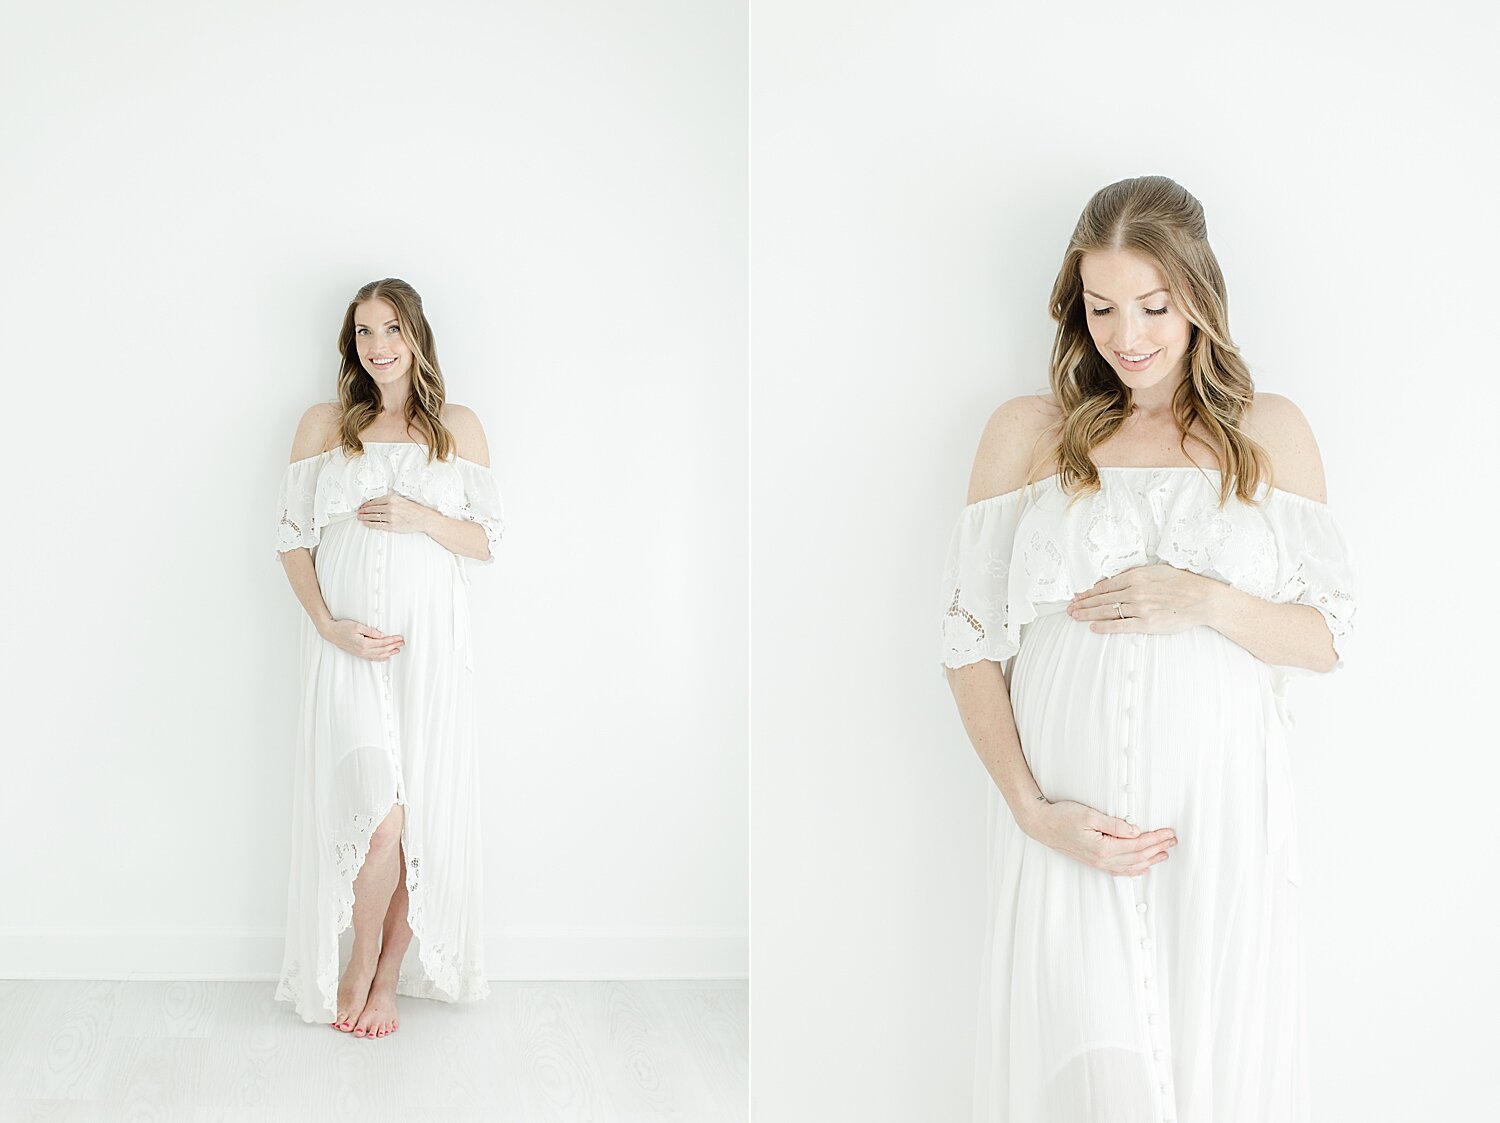 Mama-to-be wearing white fillyboo maternity dress for photos in studio with Kristin Wood Photography.